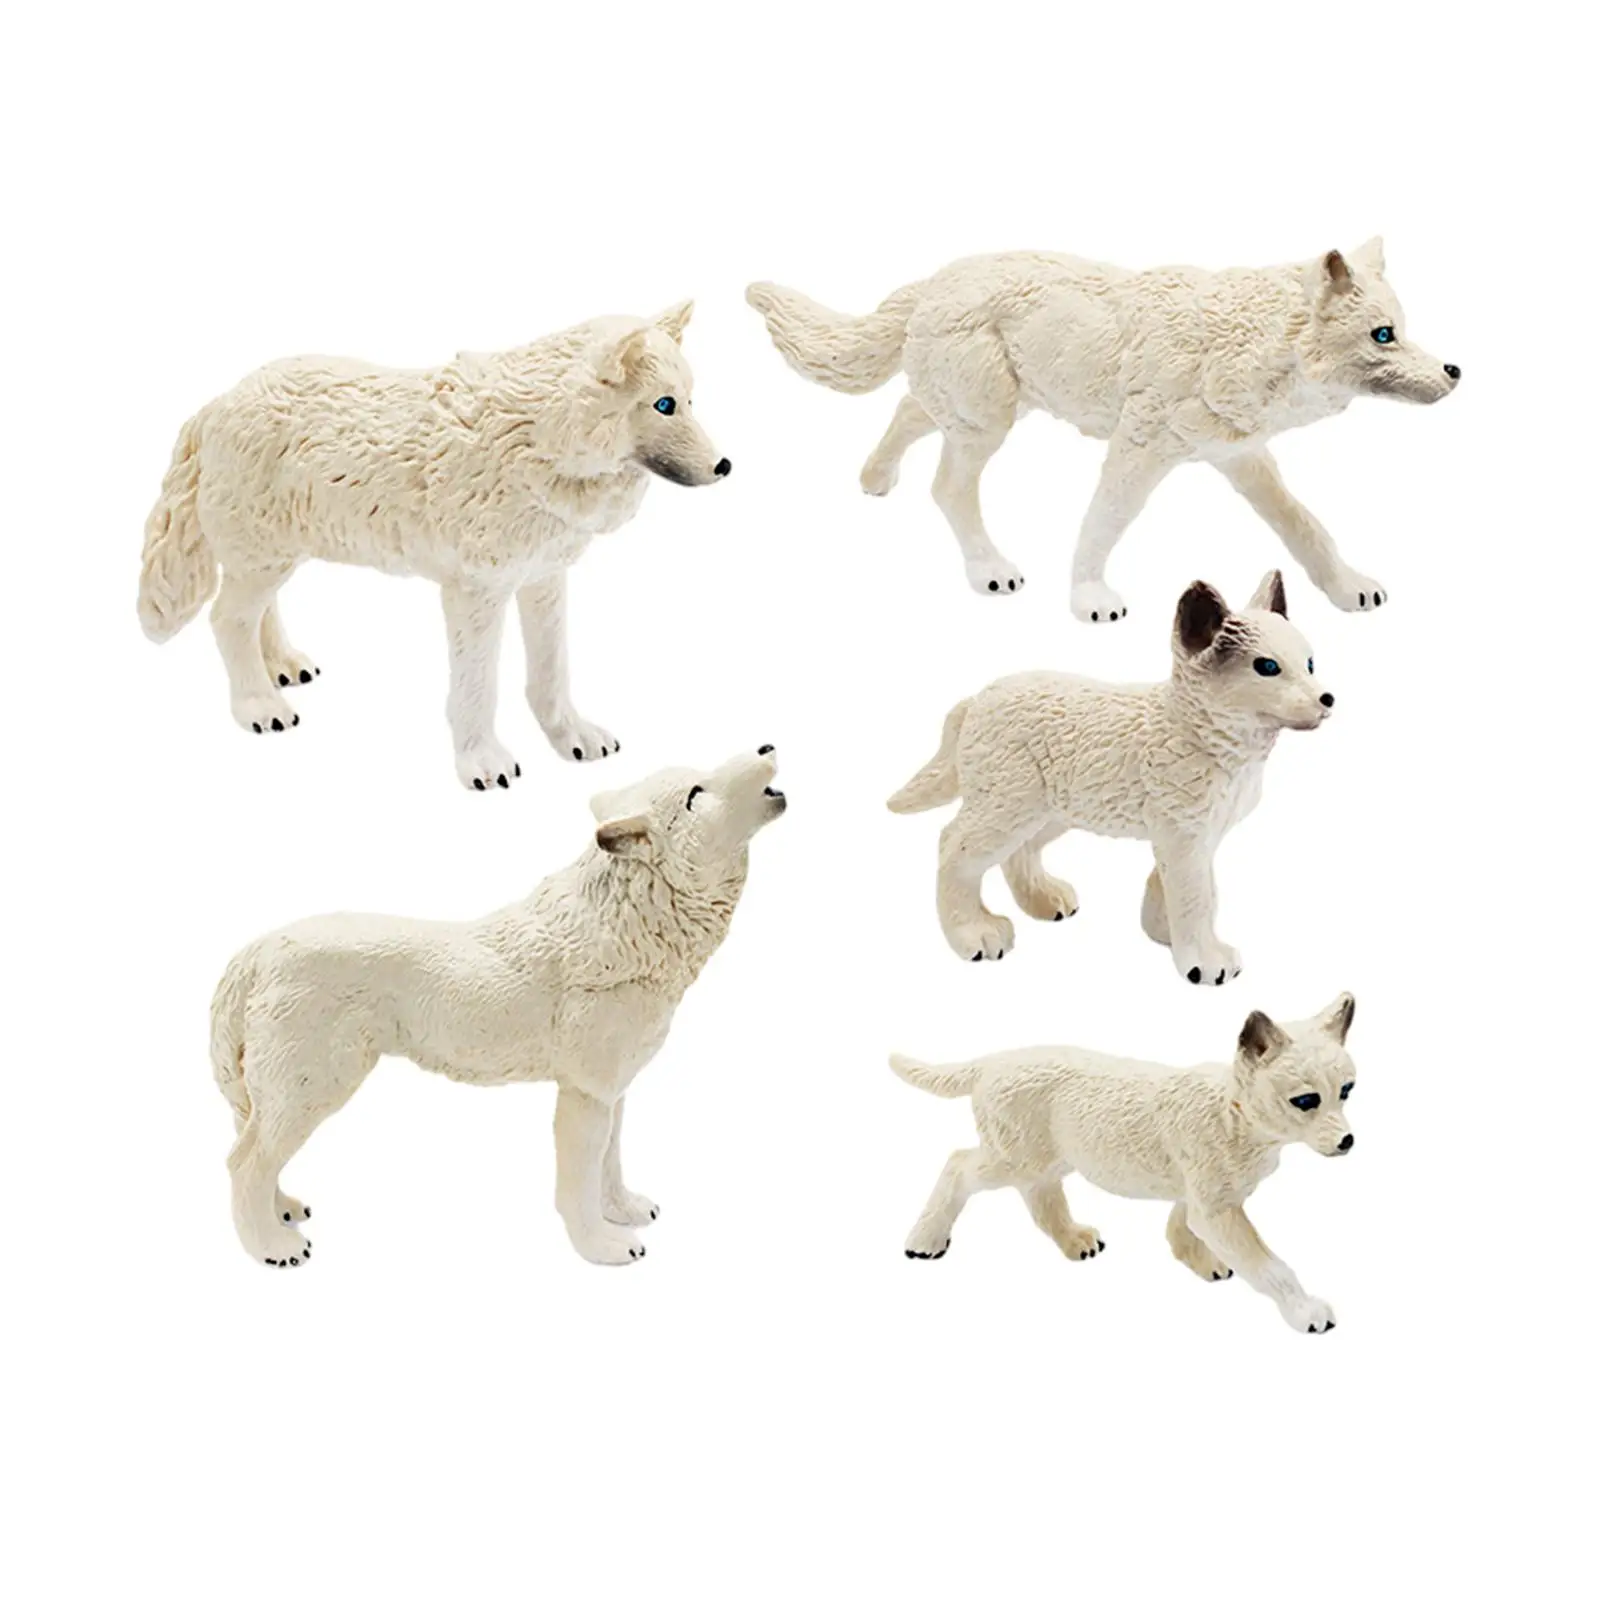 5Pcs Wolf Toy Figurines Wolf Animal Figures for Xmas Present Birthday Gifts